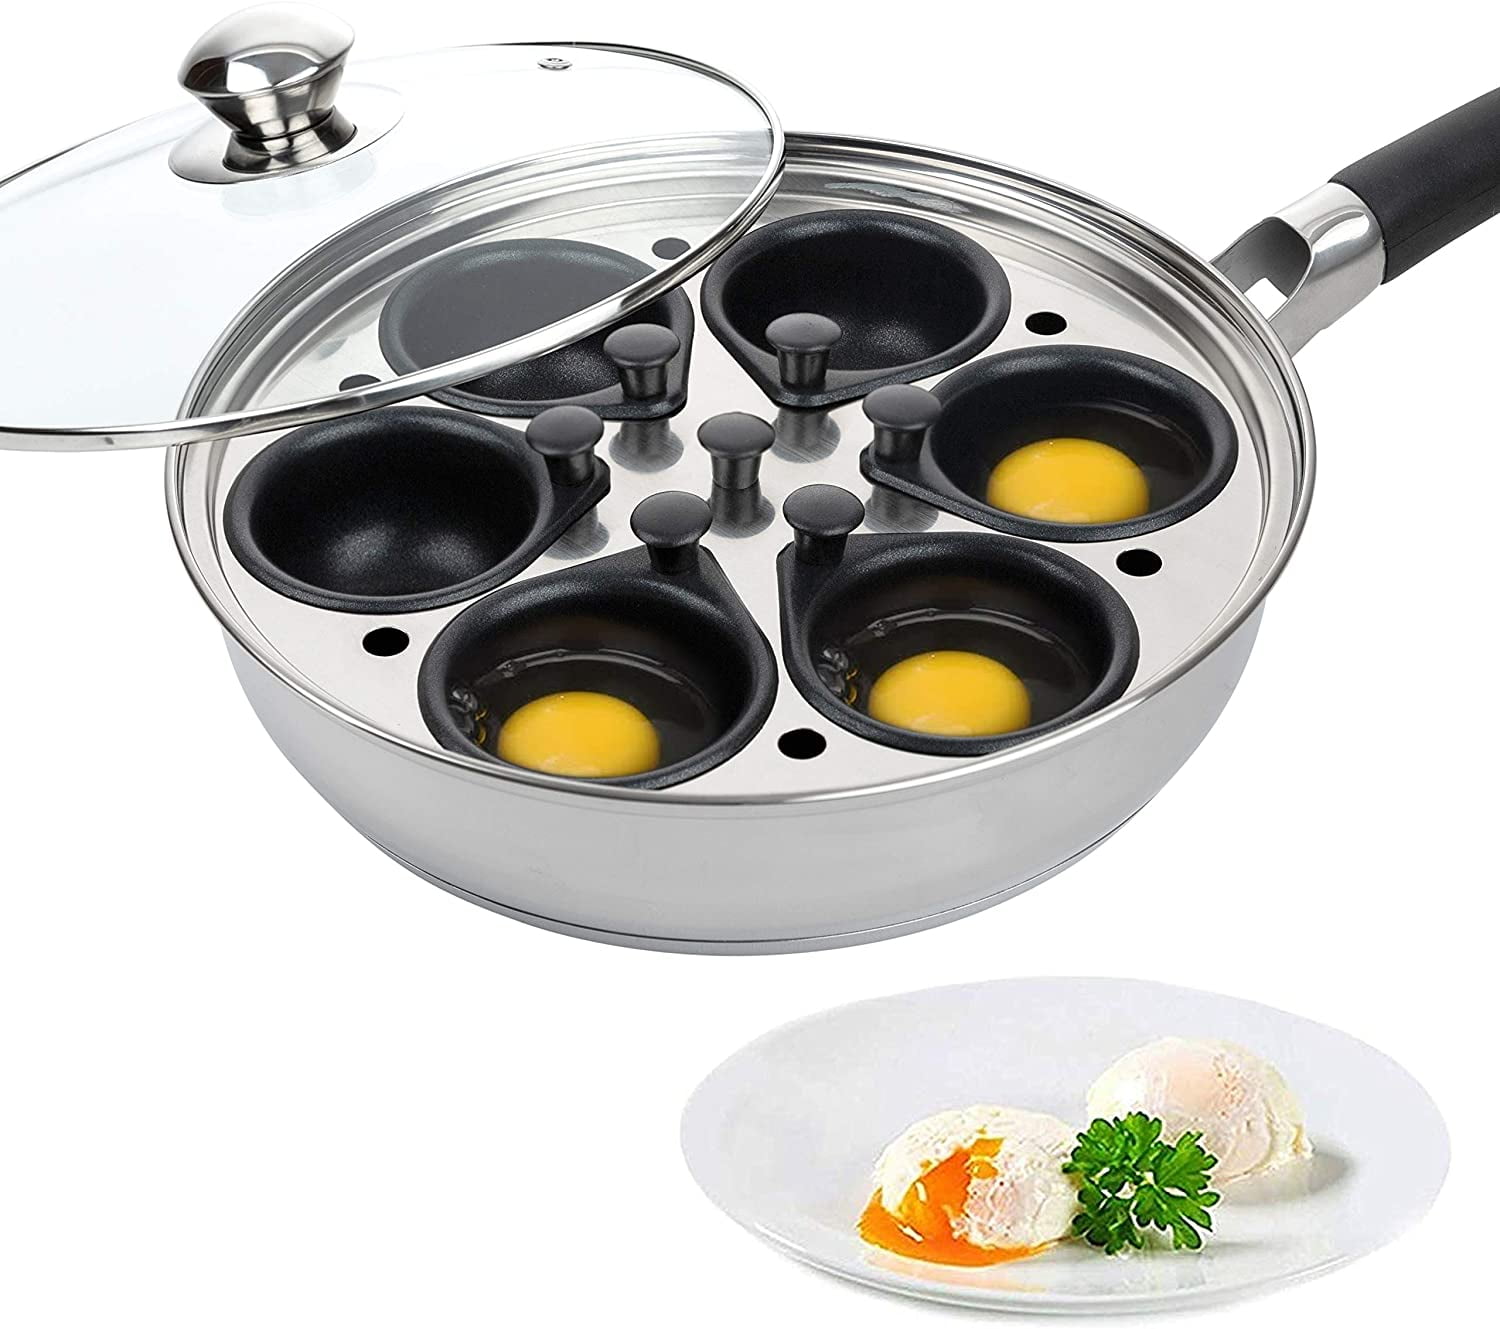 Egg Boiler Cooker Egg Poacher Poached Egg Pan Poached Egg Cups Stainless Steel Non-Stick for Steaming Eggs and Boiling Eggs